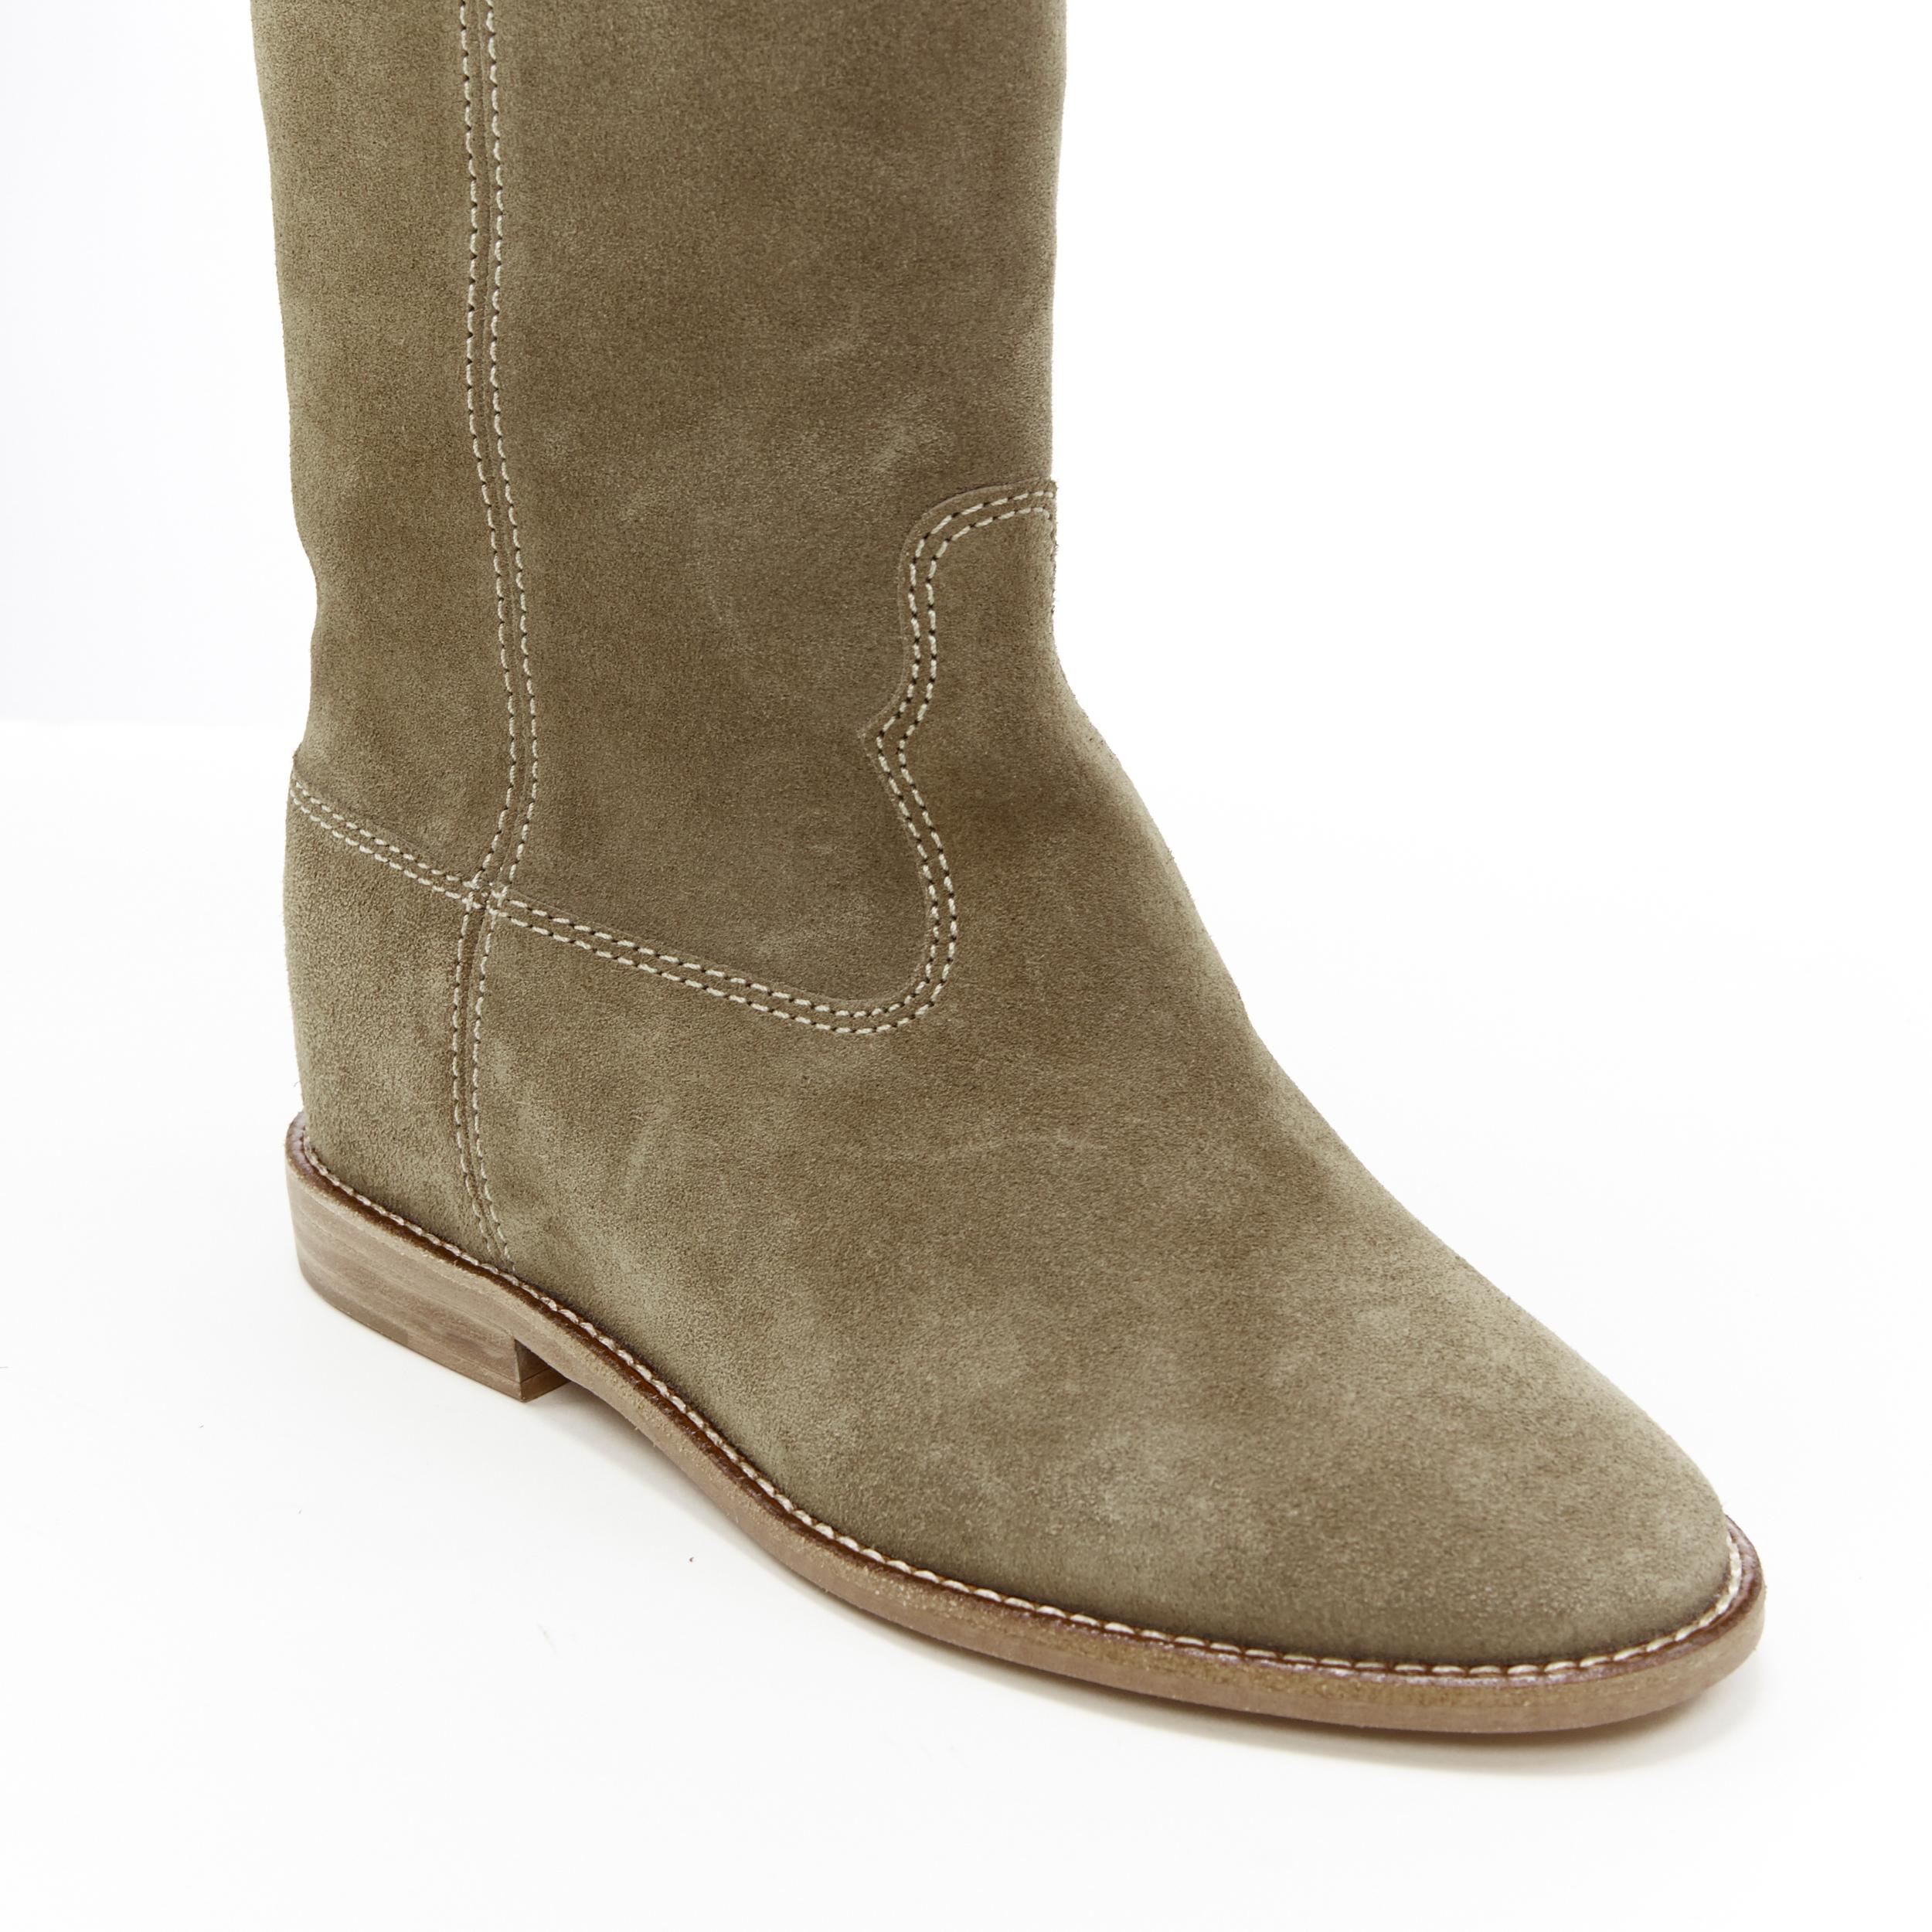 Women's new ISABEL MARANT Cleave Taupe suede concealed wedge knee high western boot EU37